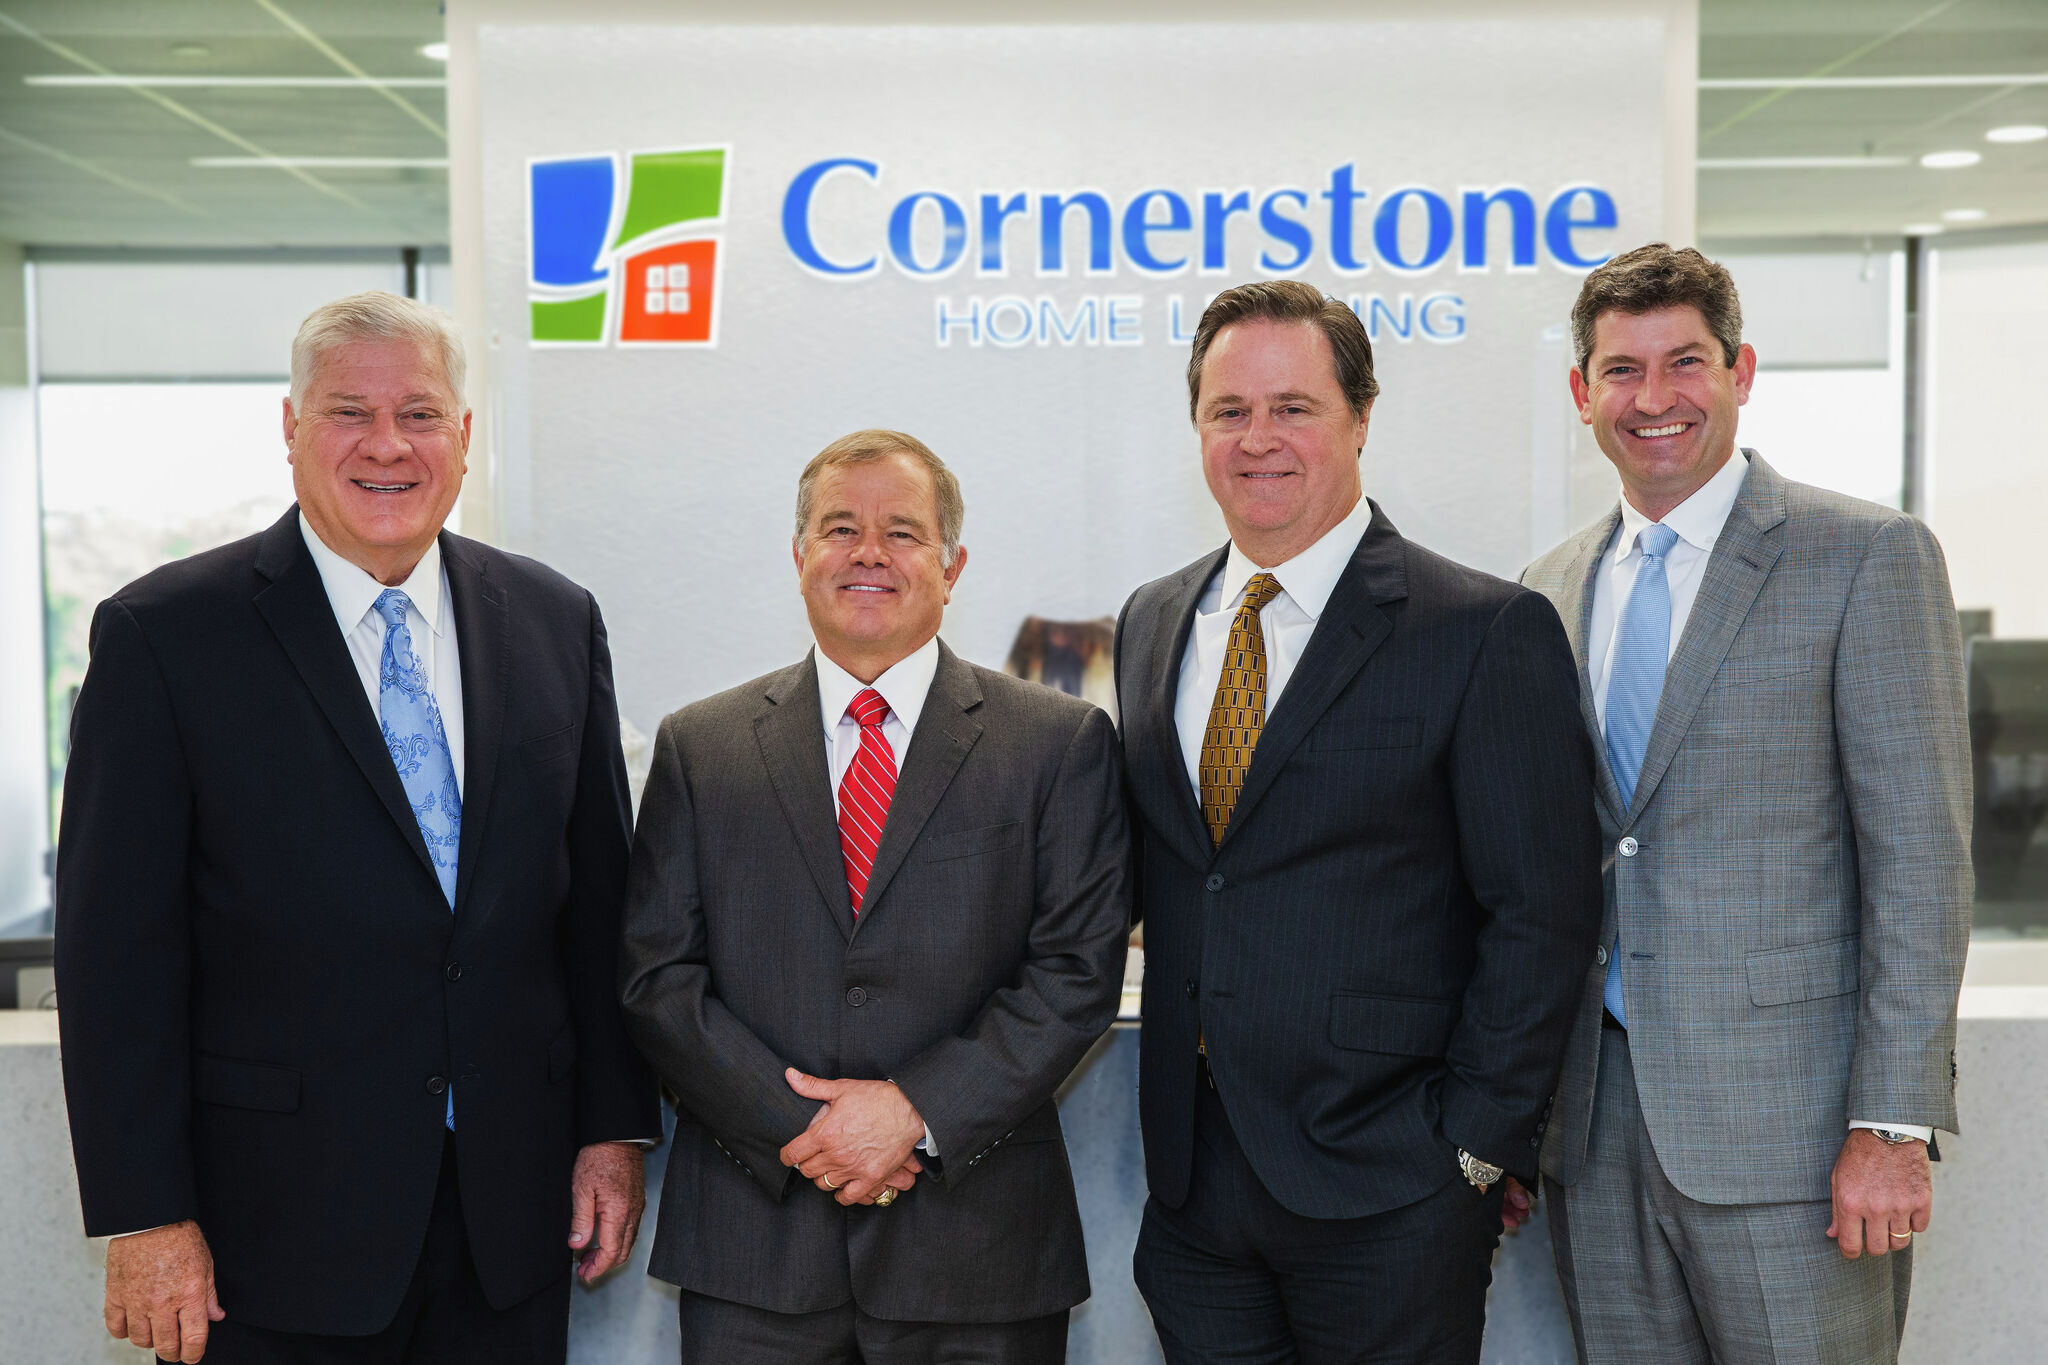  Cornerstone Home Lending merges with Roscoe State Bank 